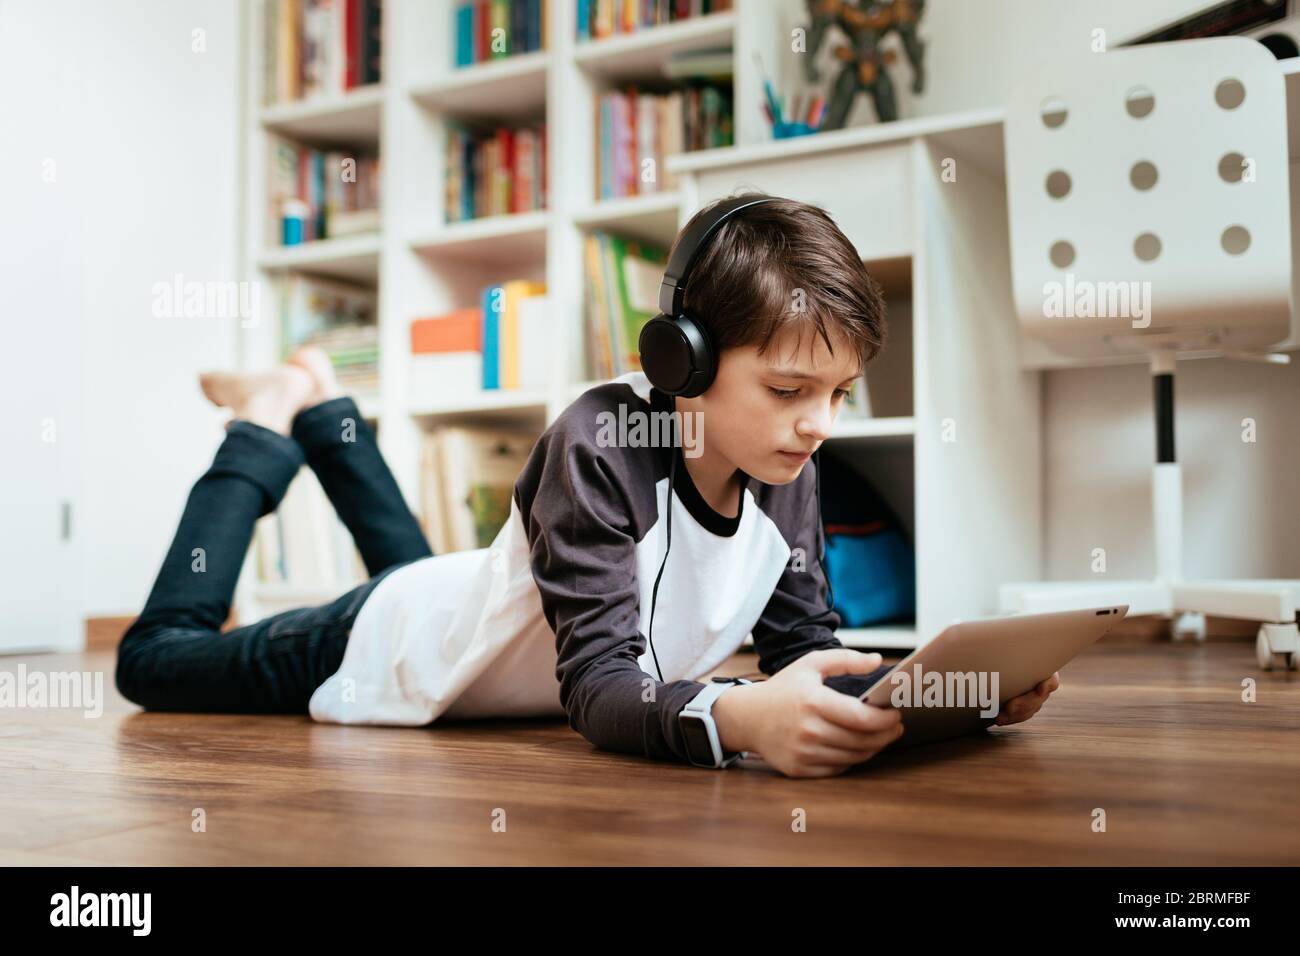 Young student wearing headphones lying on the floor studying at home working with digital tablet. Boy relaxing and online learning on digital tablet. Stock Photo